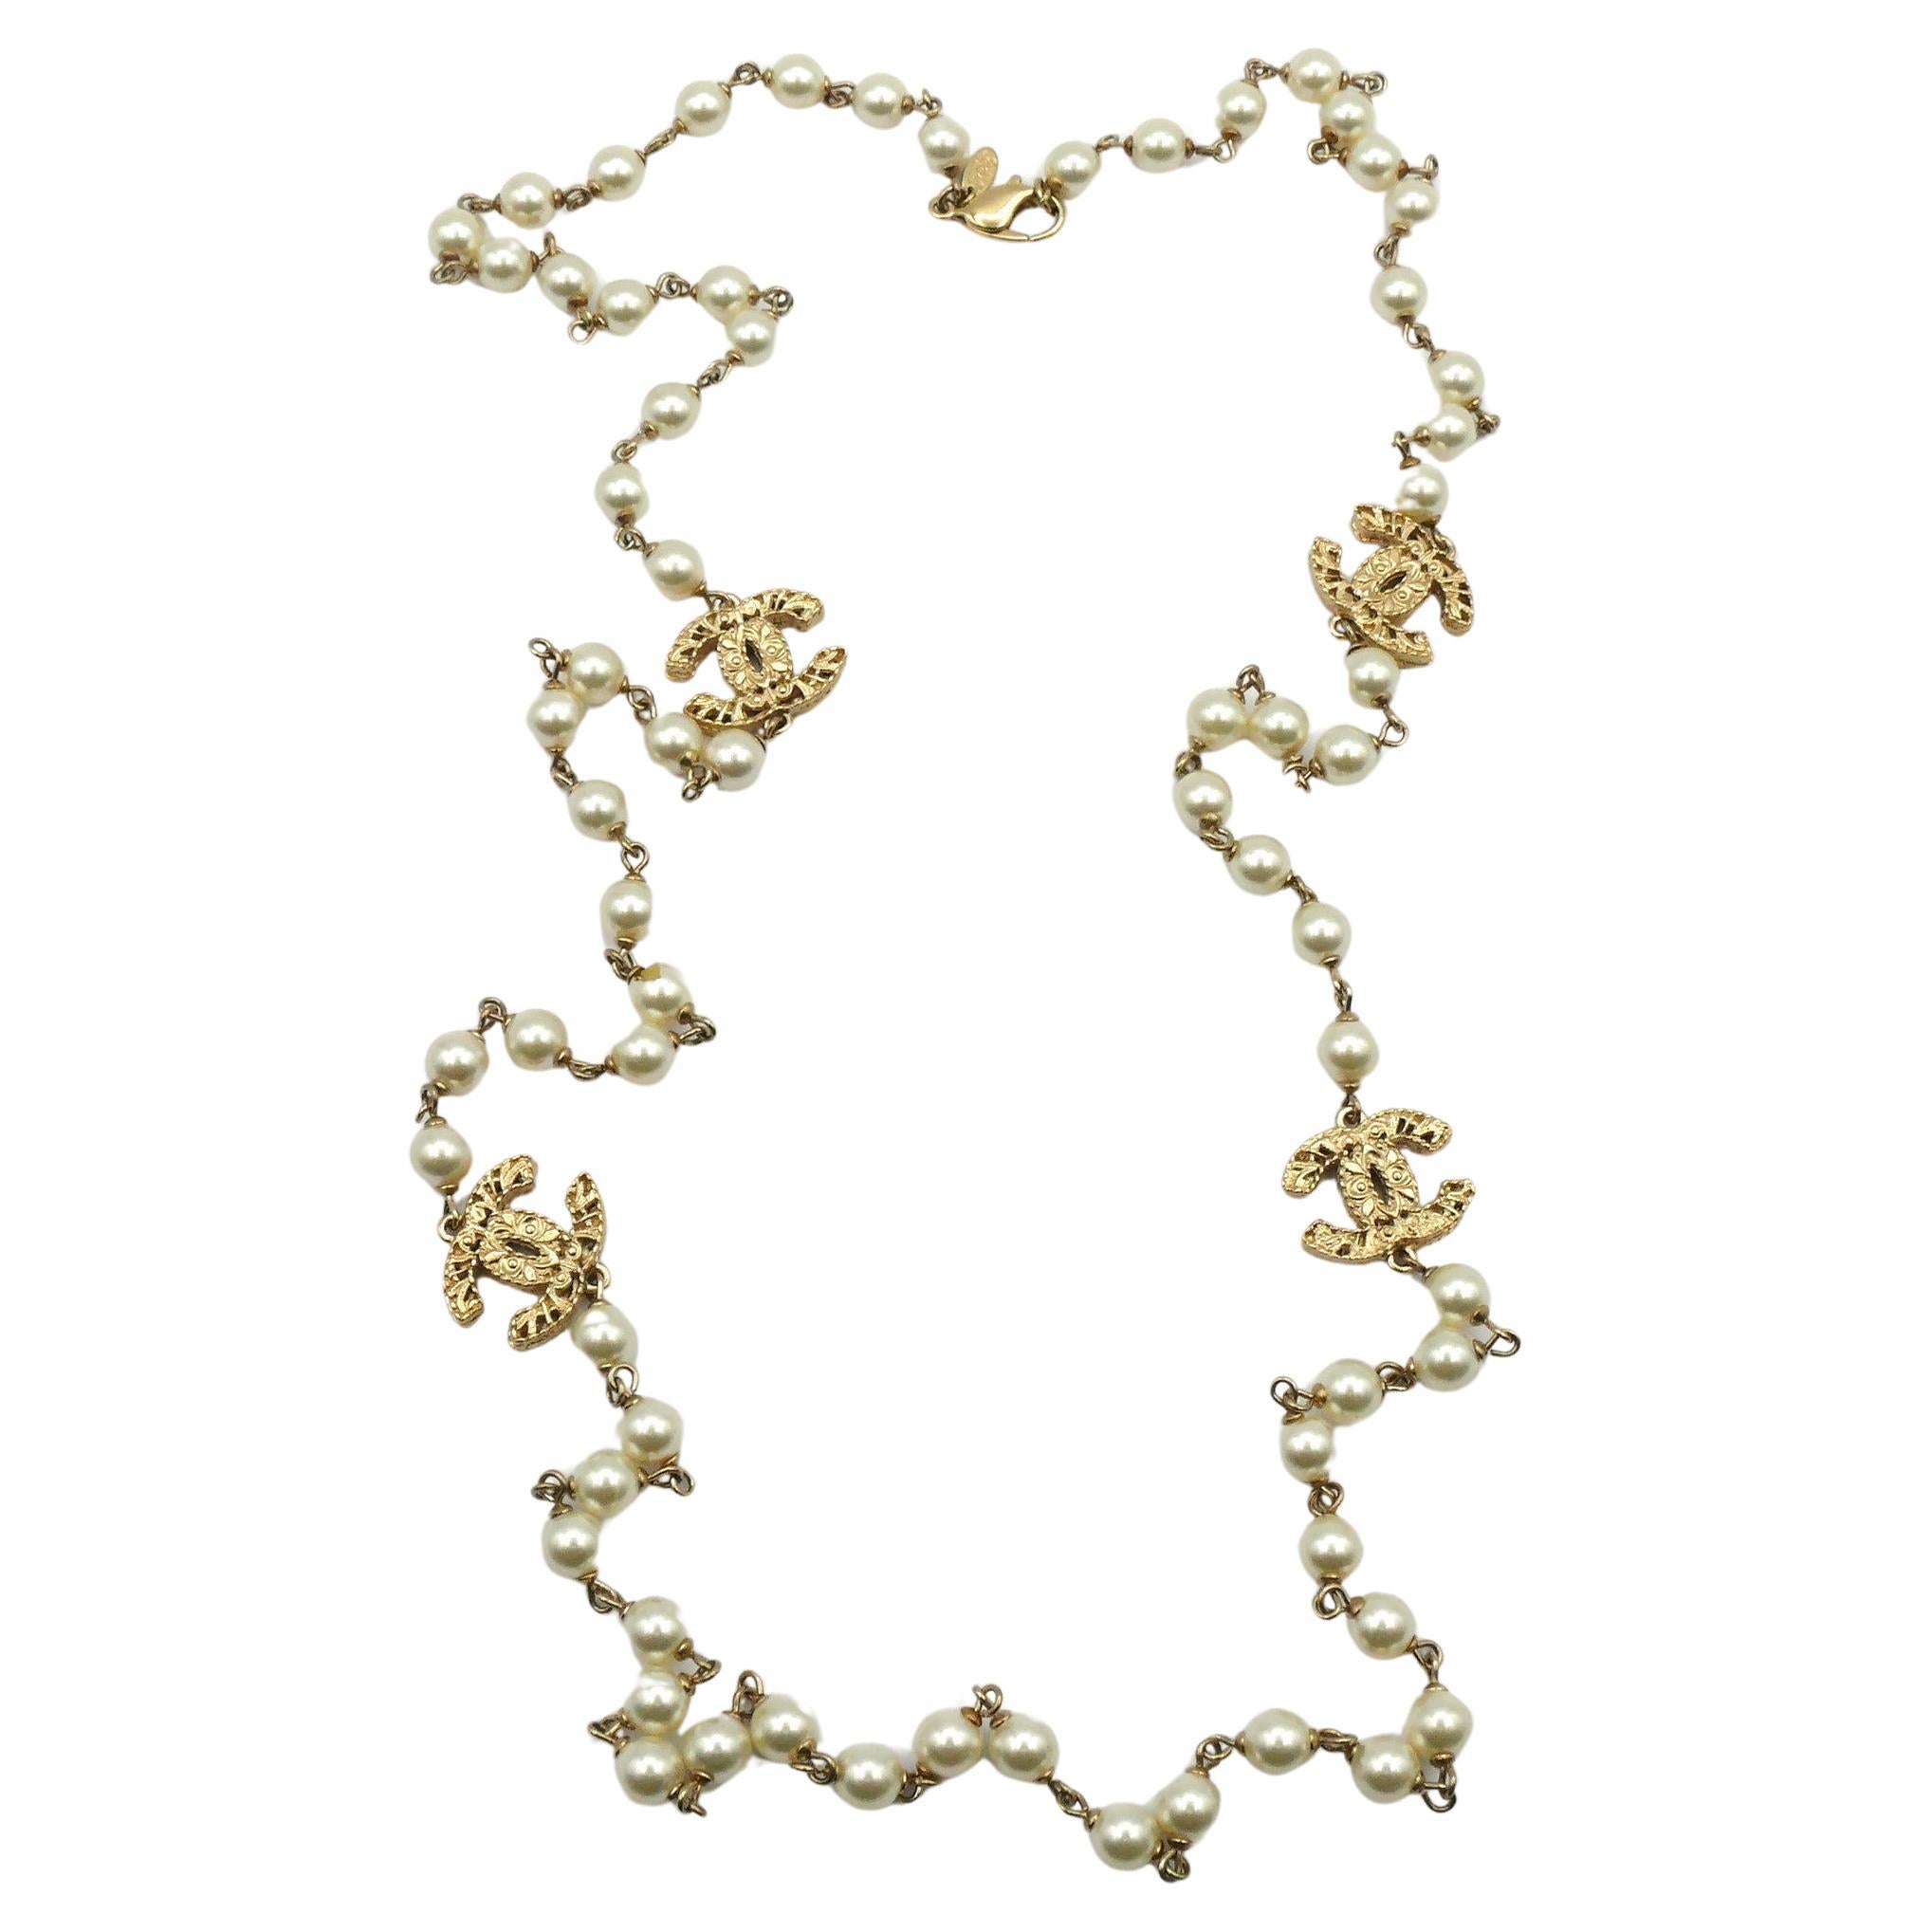 CHANEL by KARL LAGERFELD Faux Pearl CC Logo Necklace, 2008